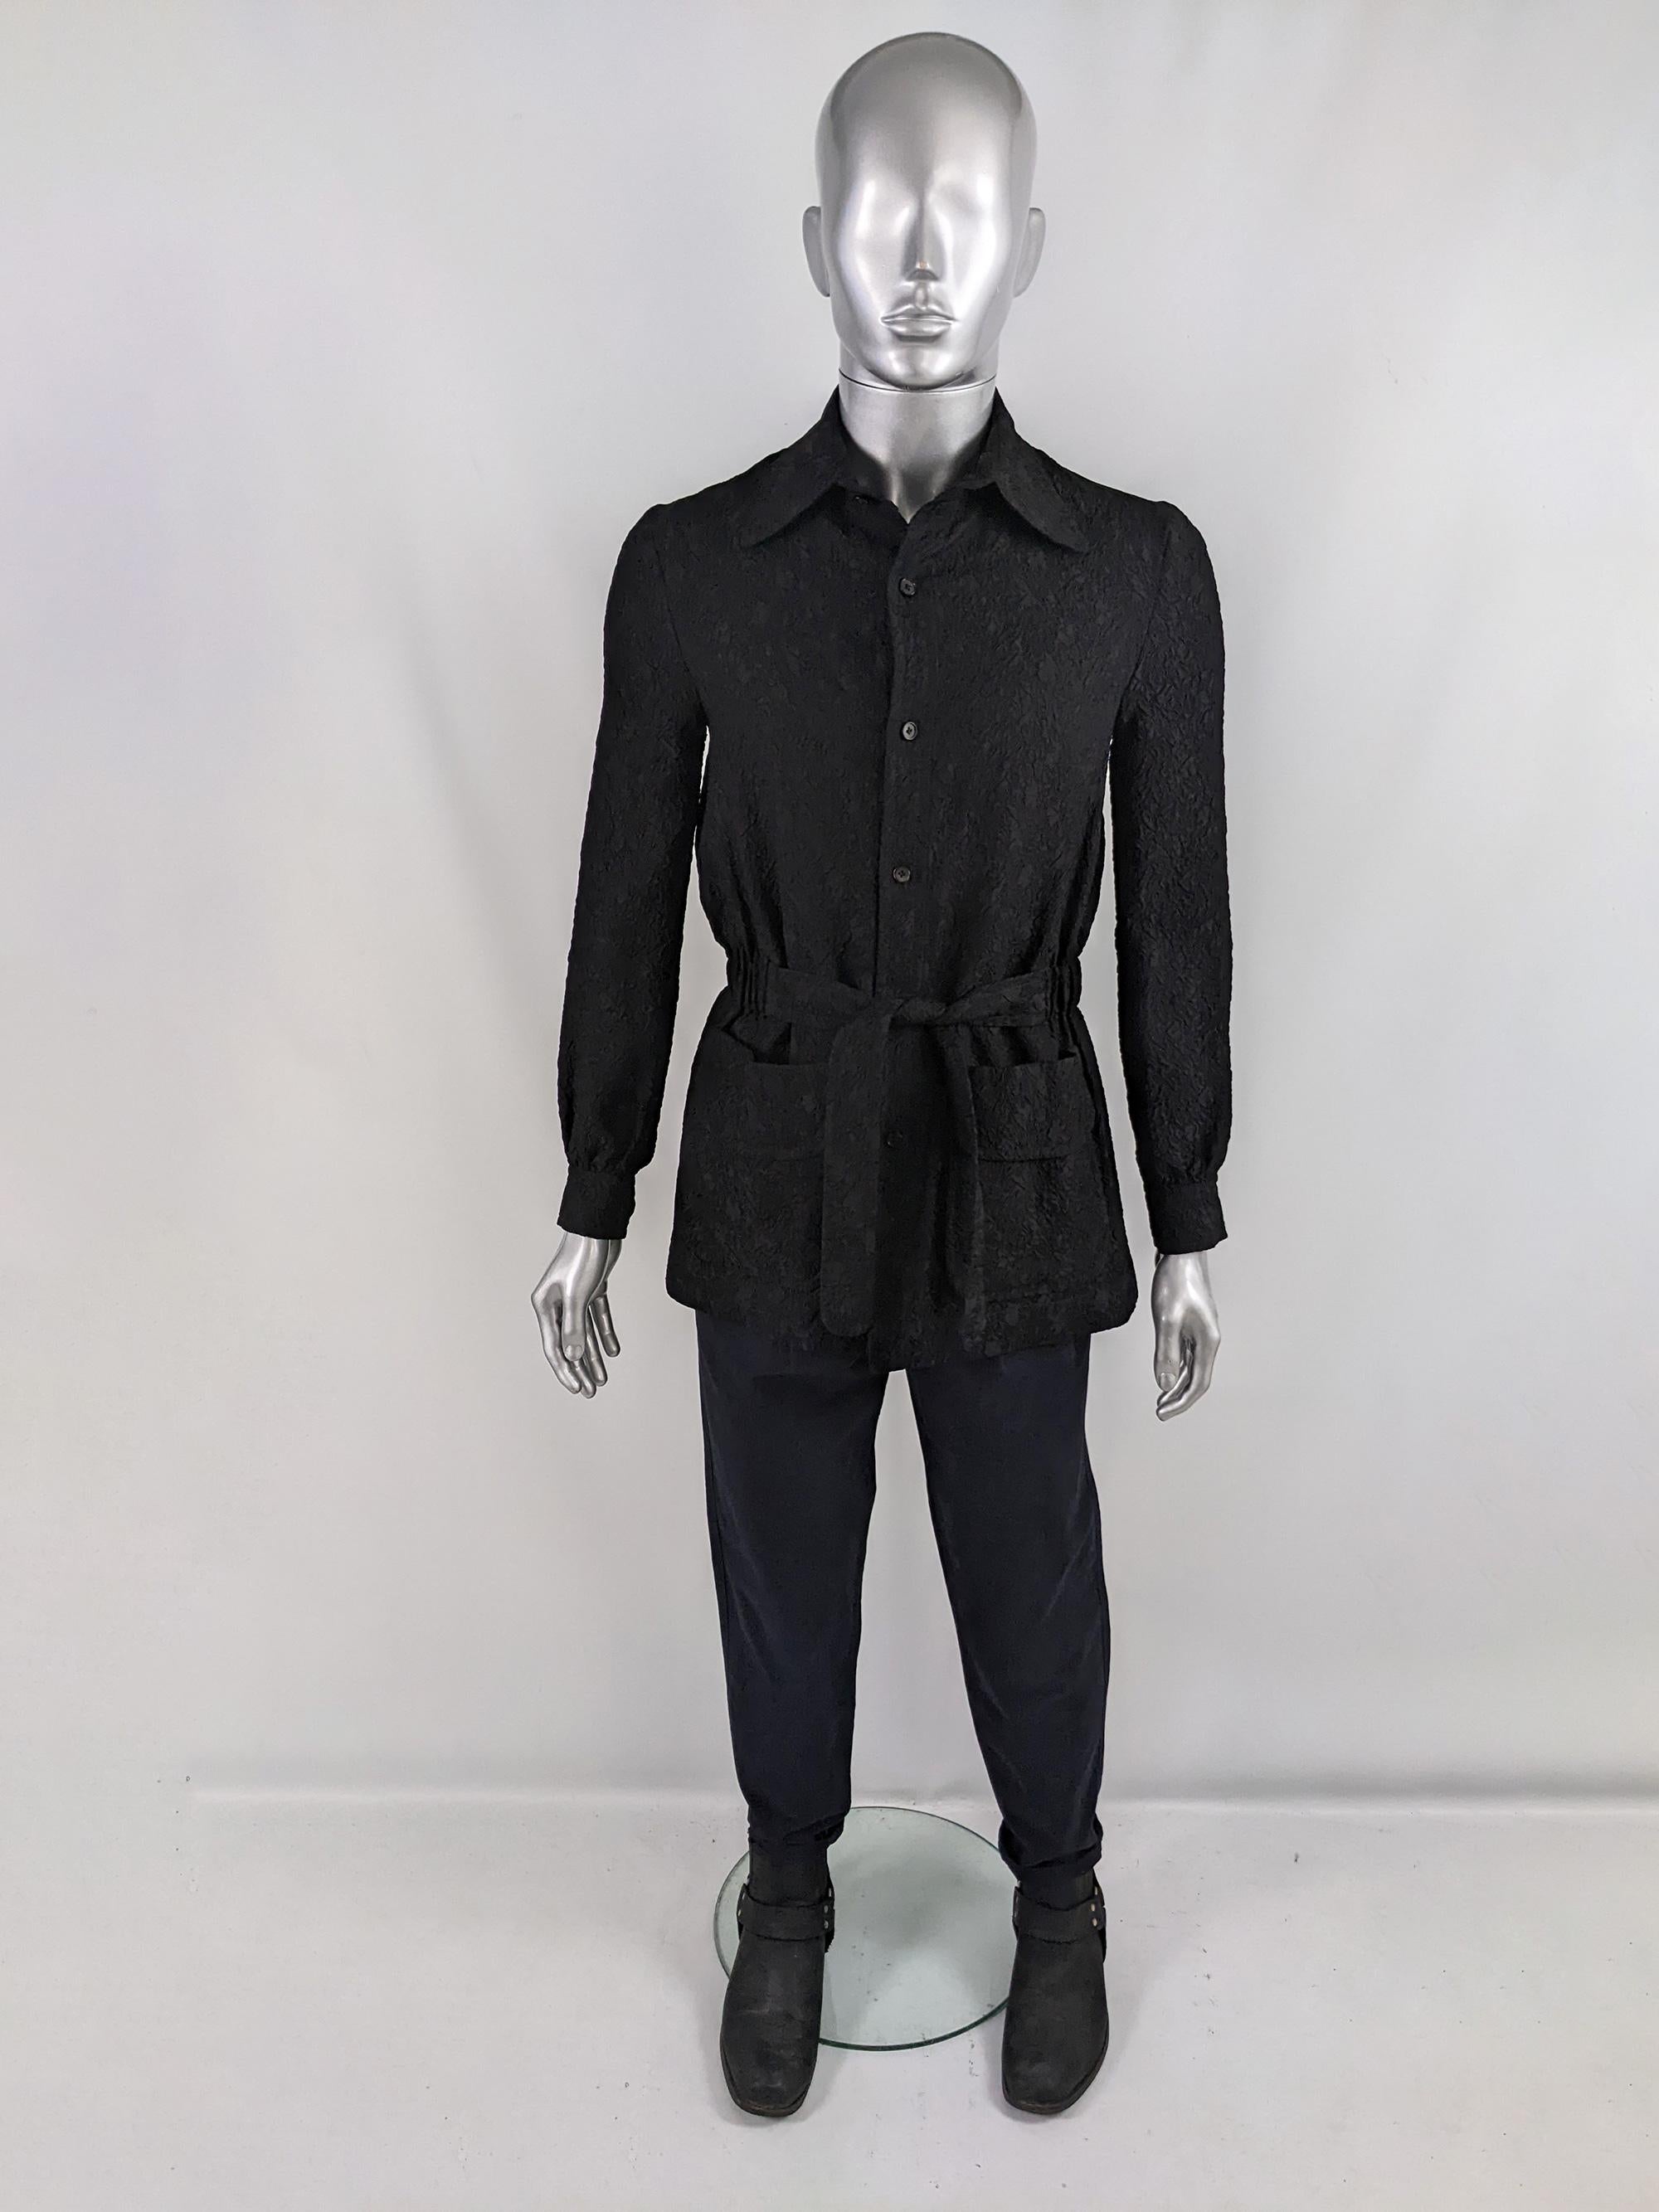 An incredibly rare and stylish vintage mens shirt / lightweight jacket from the 60s by British couturier and Savile Row tailor, Hardy Amies. In a black textured cloqué fabric with a half belt at the front and an elasticated back creating that